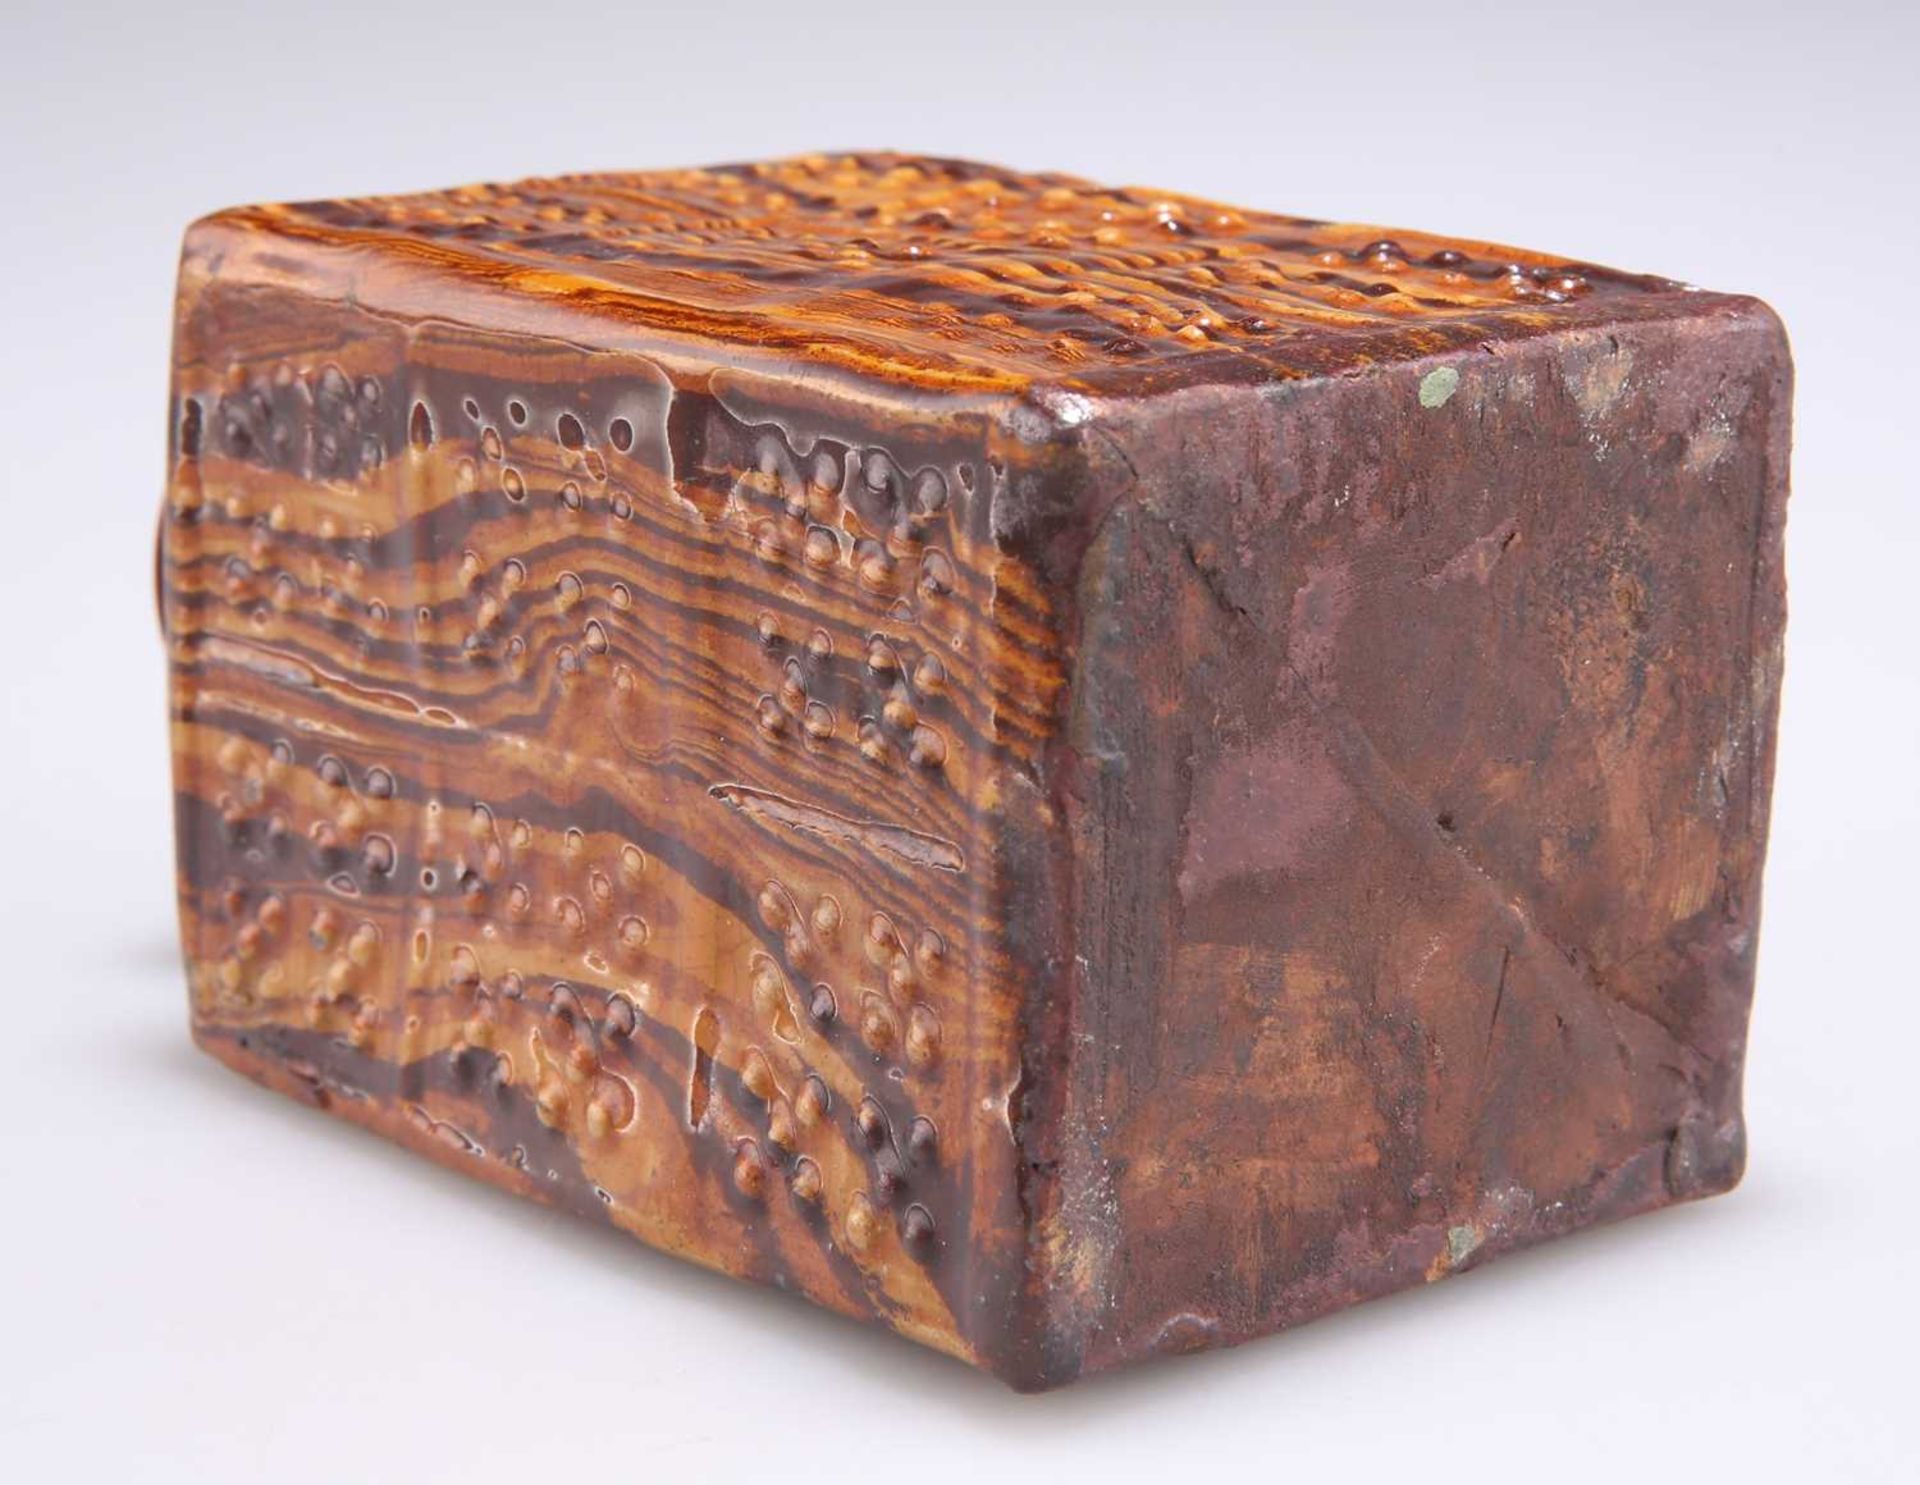 A RARE AGATE WARE TEA CADDY, STAFFORDSHIRE, MID-18TH CENTURY - Image 3 of 3